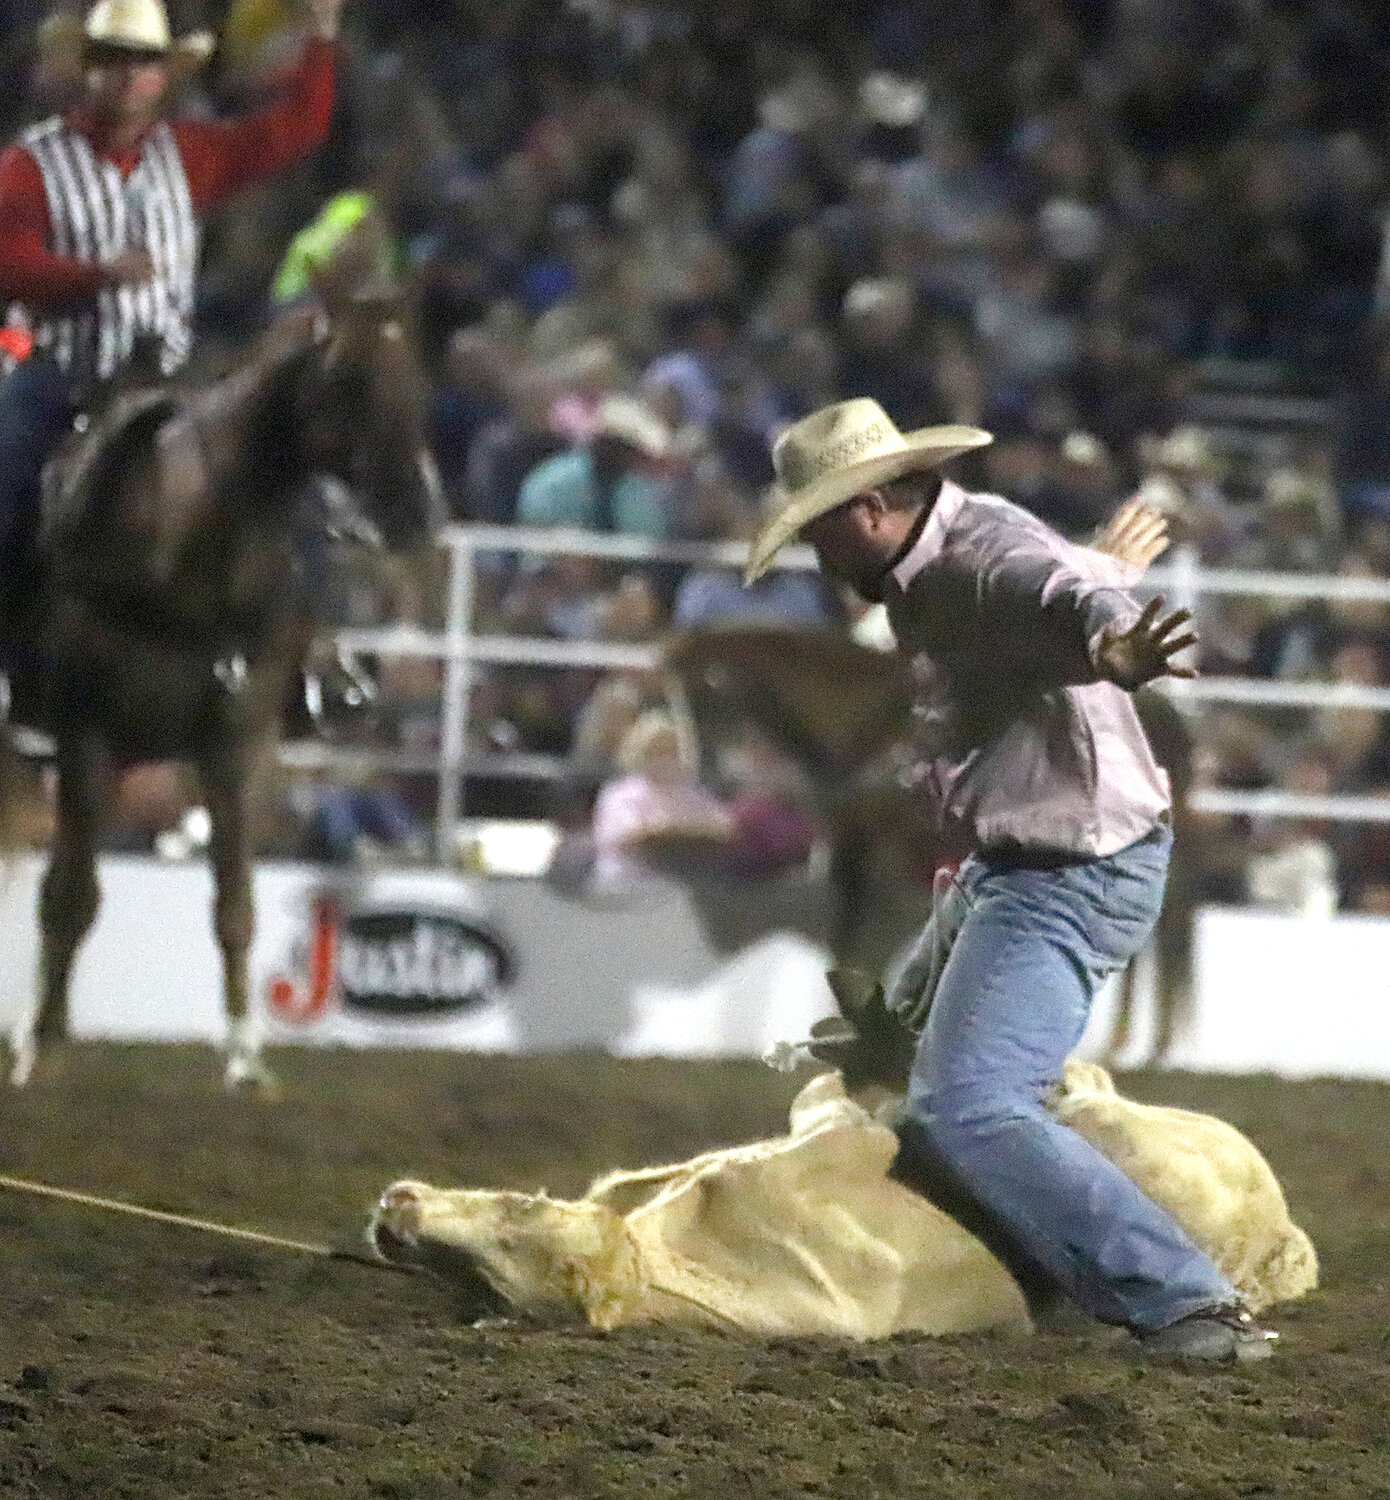 Calf-tiedowns have been part of the roping contests at the Tri-State Rodeo since its inception. Here, a cowboy clears his hands after wrapping up his animal.